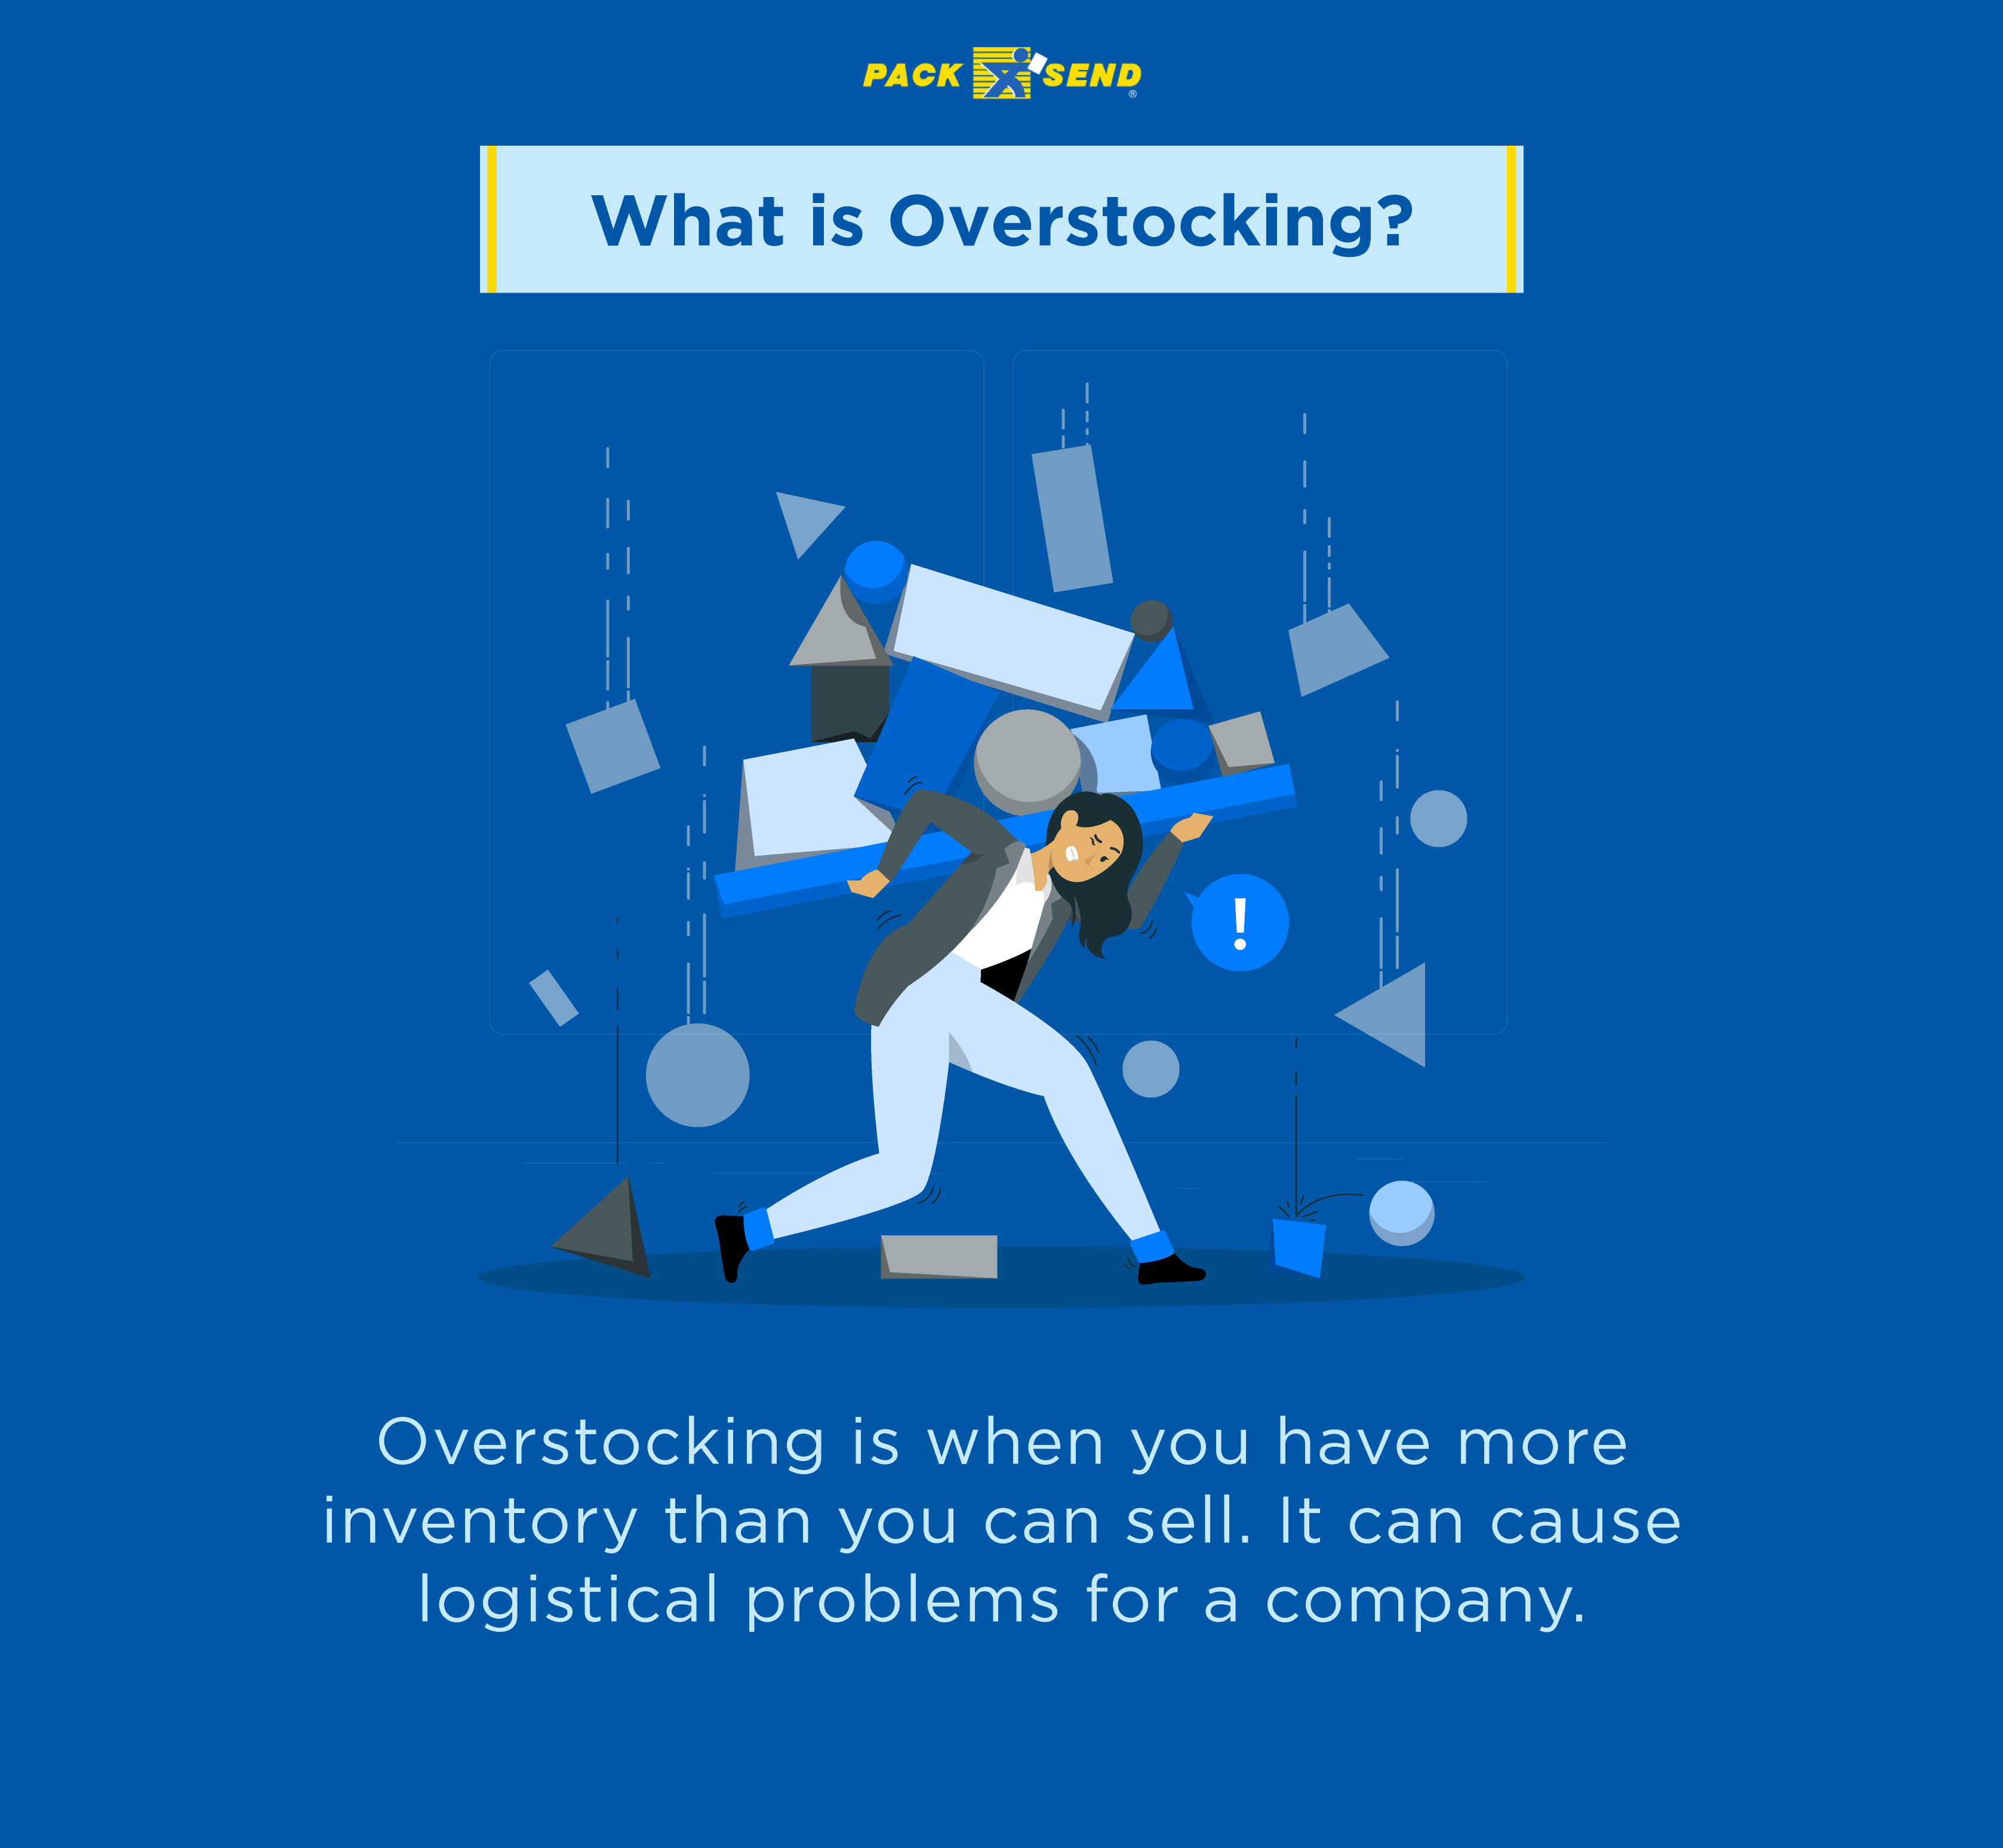 Overstocking is when you have more inventory than you can sell.